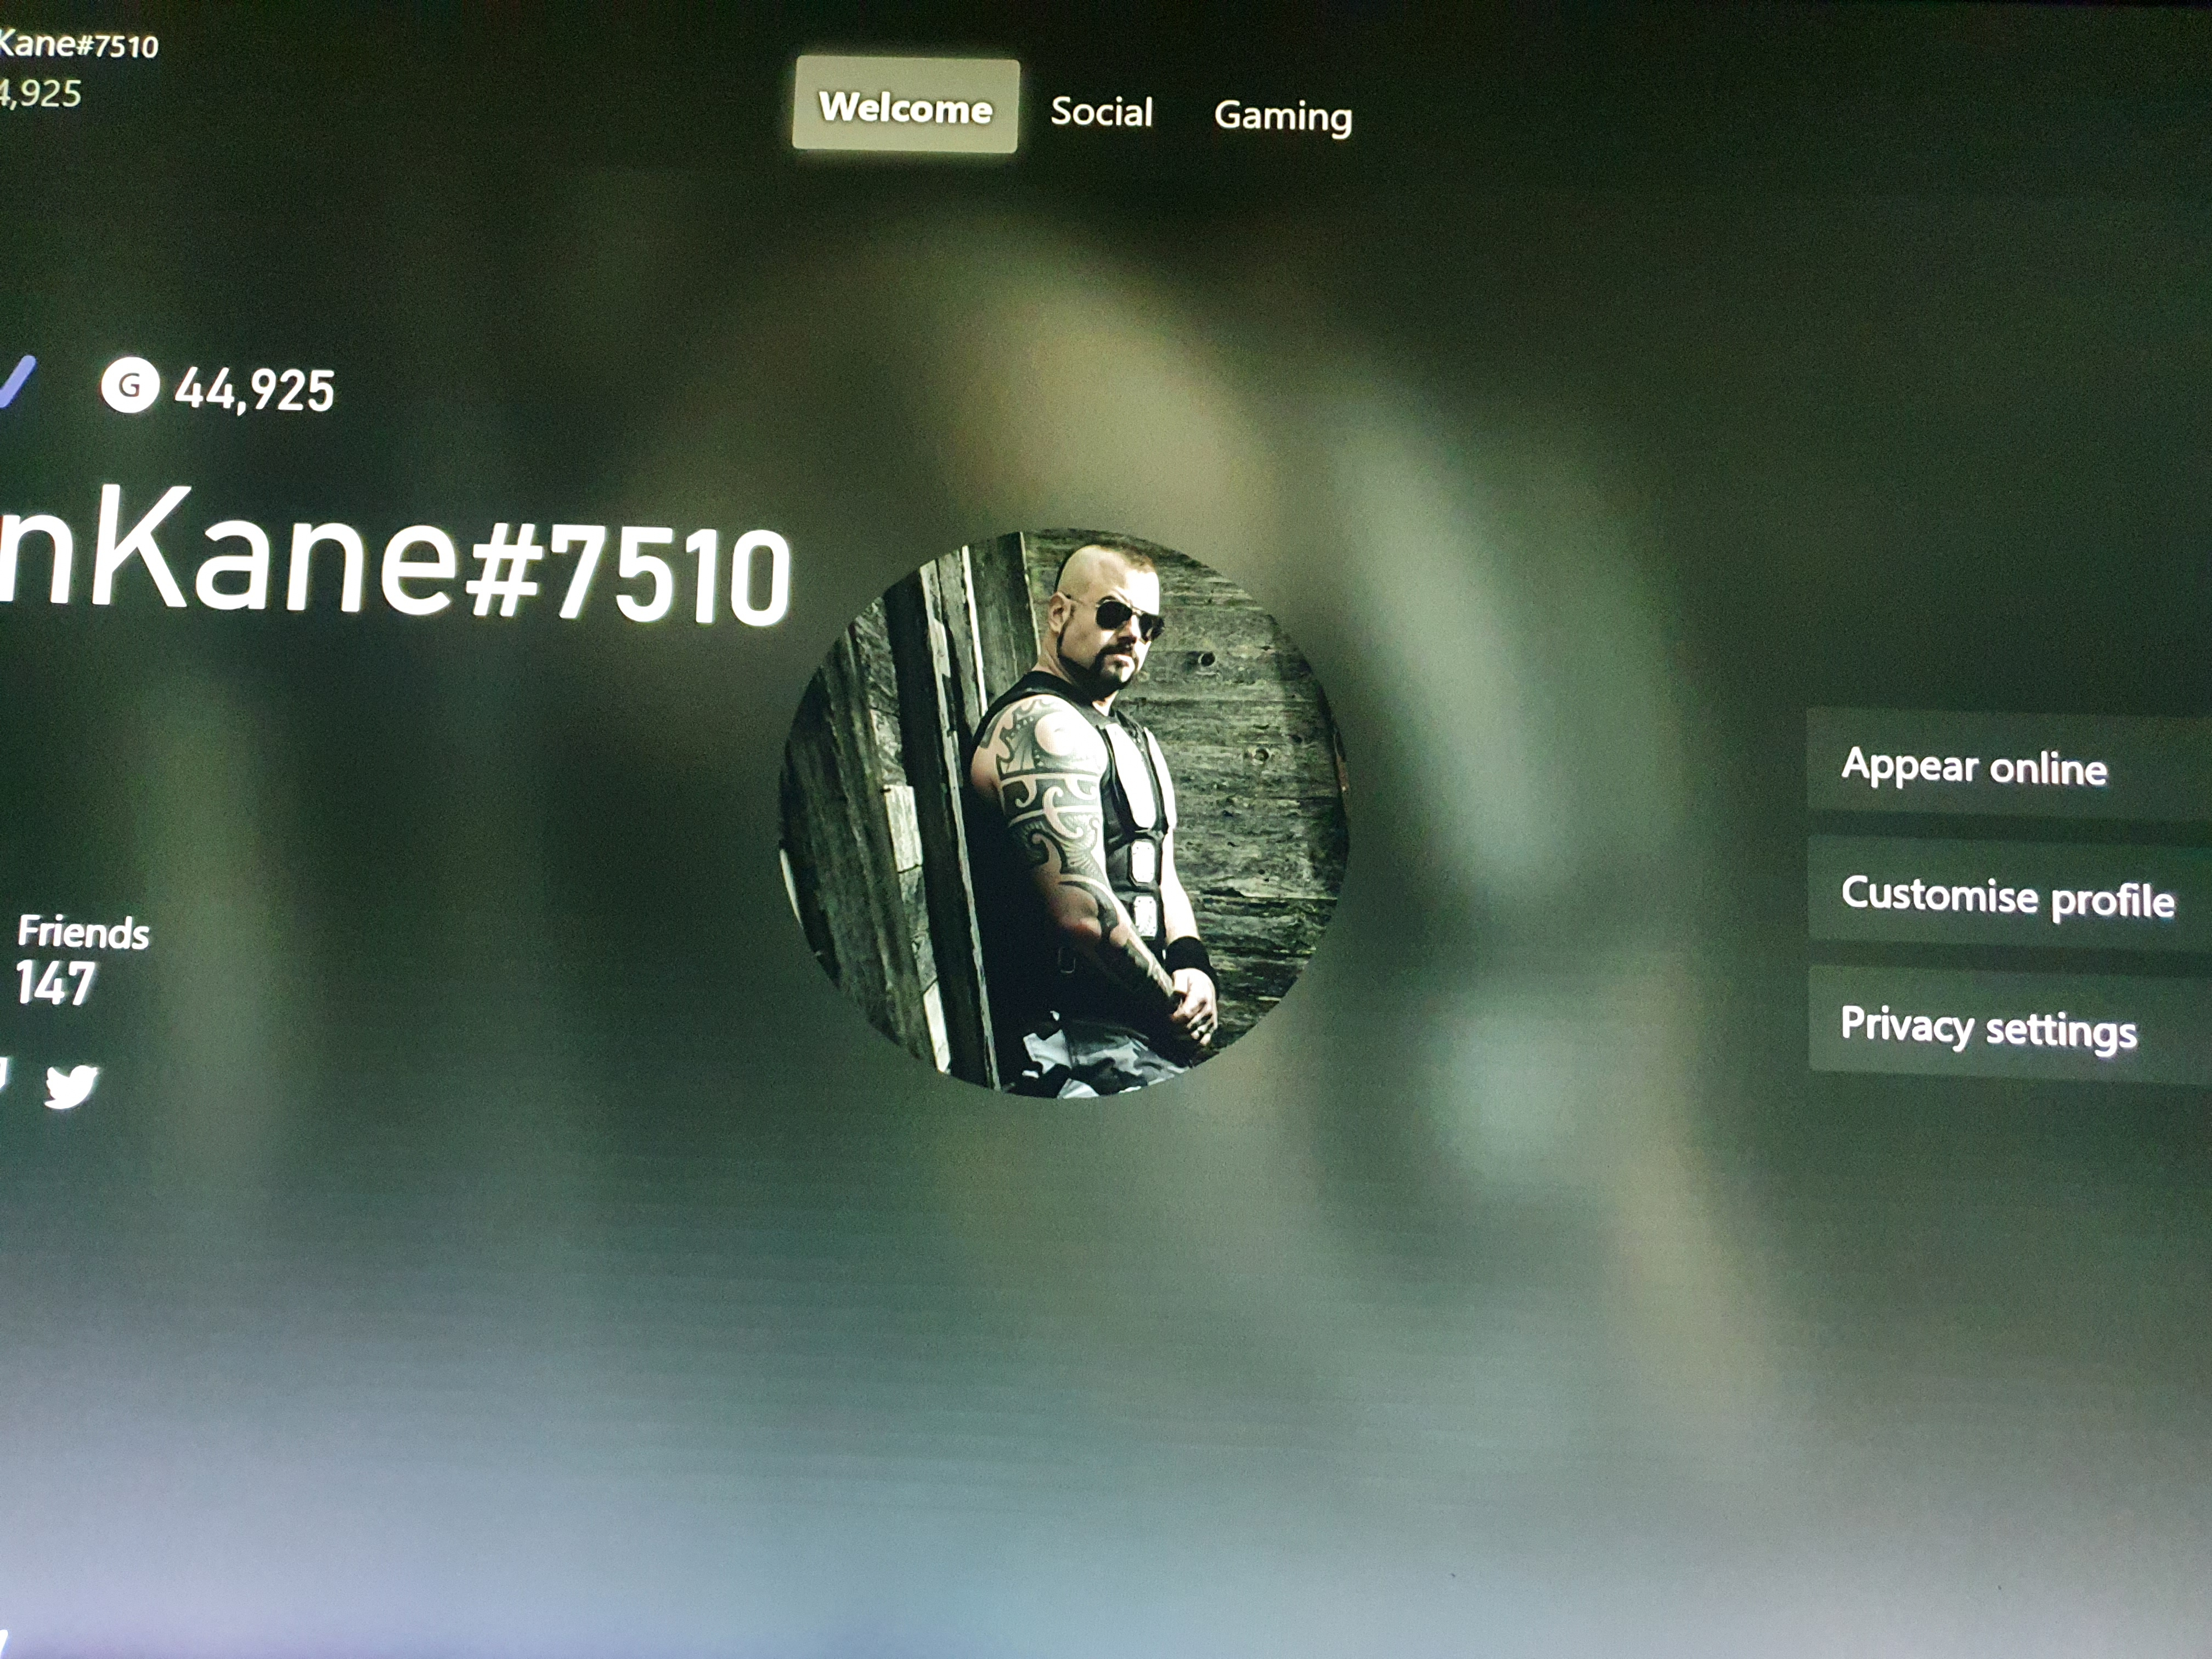 Xbox Gamerpics May Be Getting Better in the Future